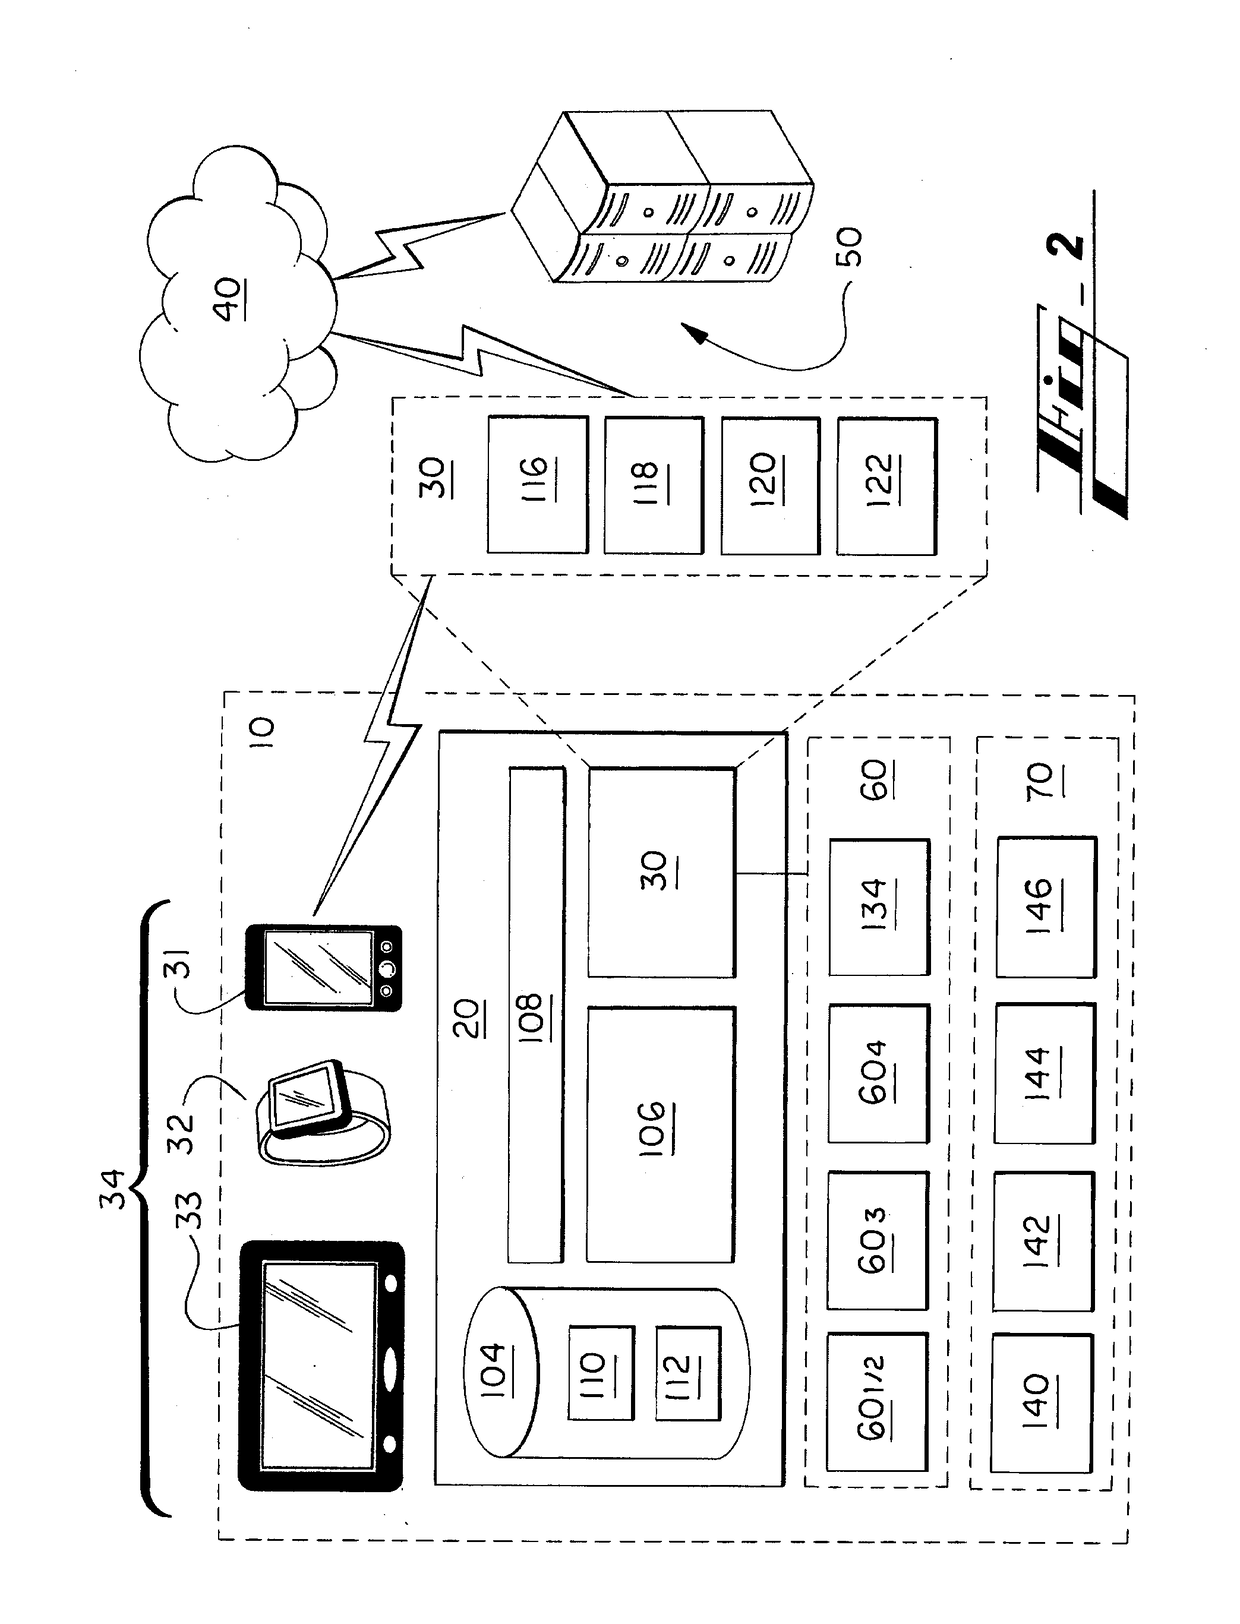 Systems for autonomous vehicle route selection and execution